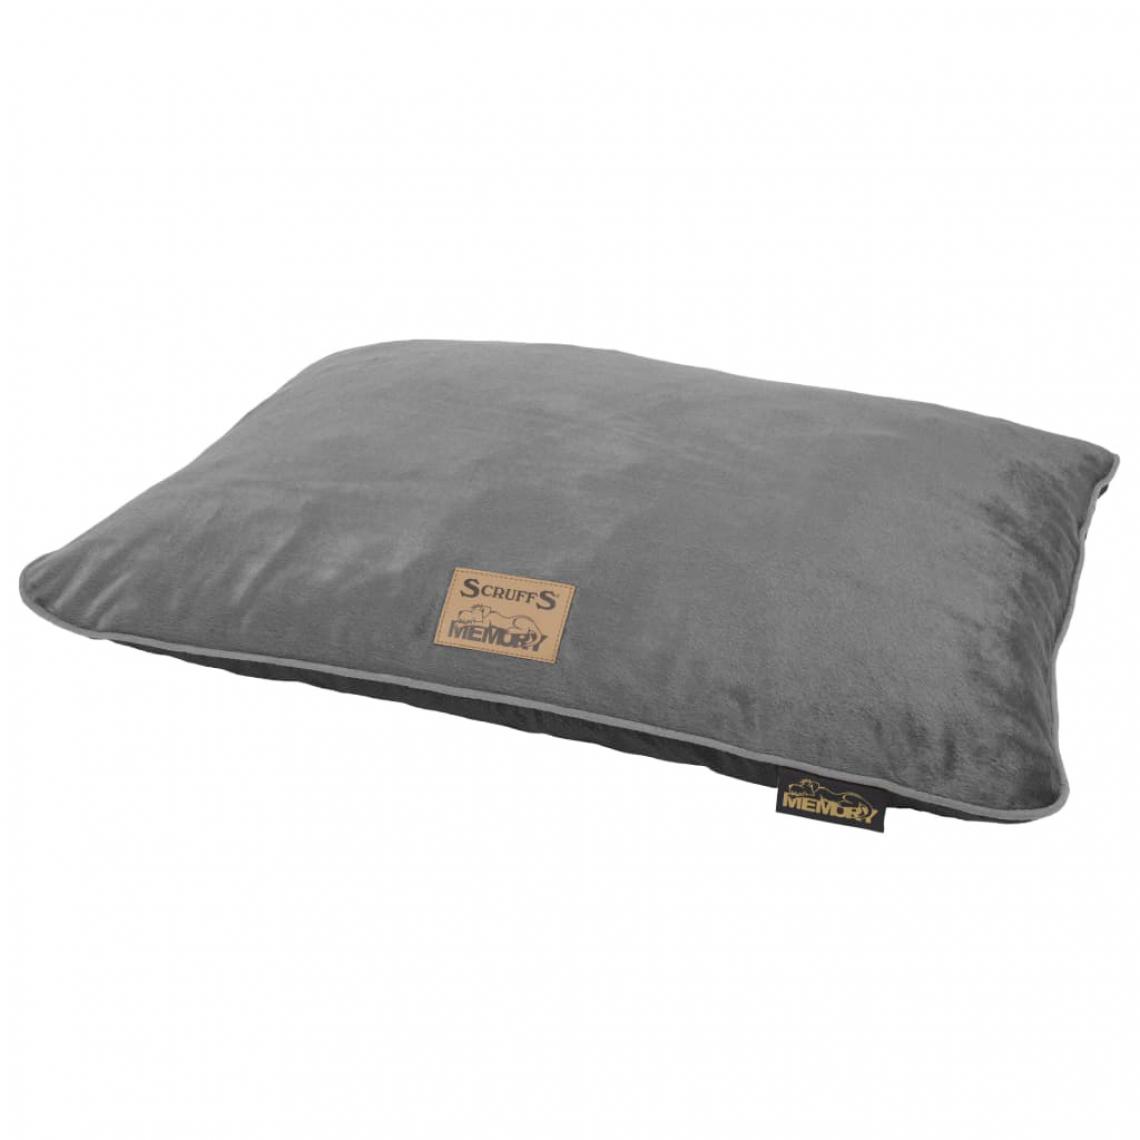 Scruffs & Tramps - Scruffs & Tramps Matelas pour chiens Bolster Ortho Gris - Corbeille pour chien